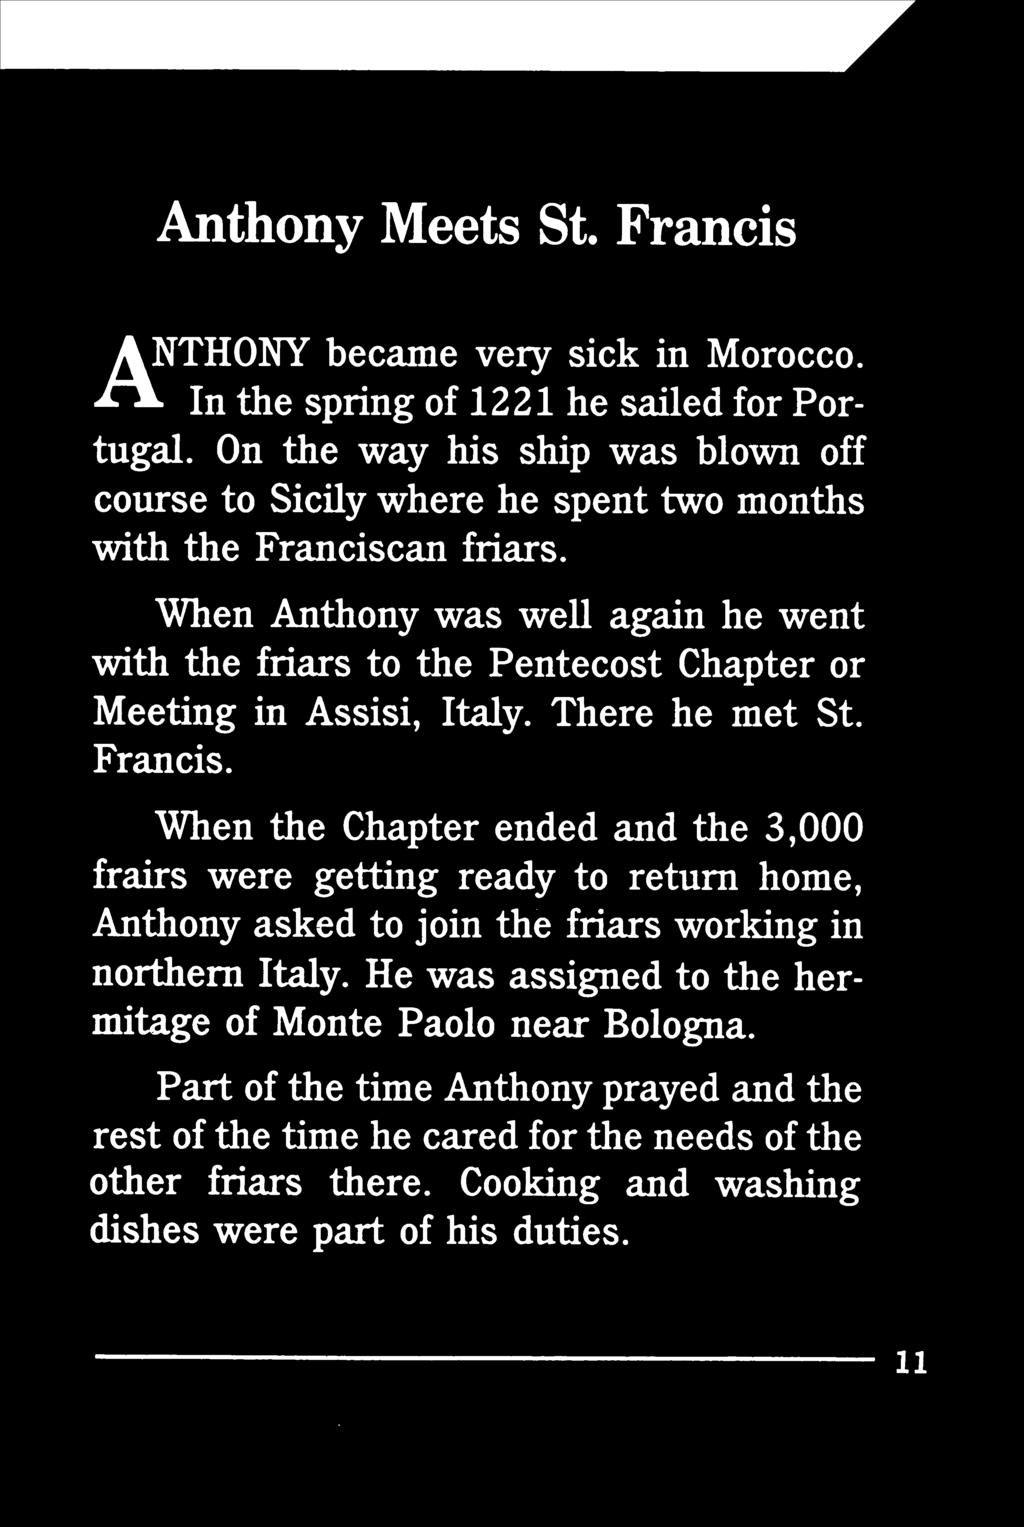 When Anthony was well again he went with the friars to the Pentecost Chapter or Meeting in Assisi, Italy. There he met St. Francis.